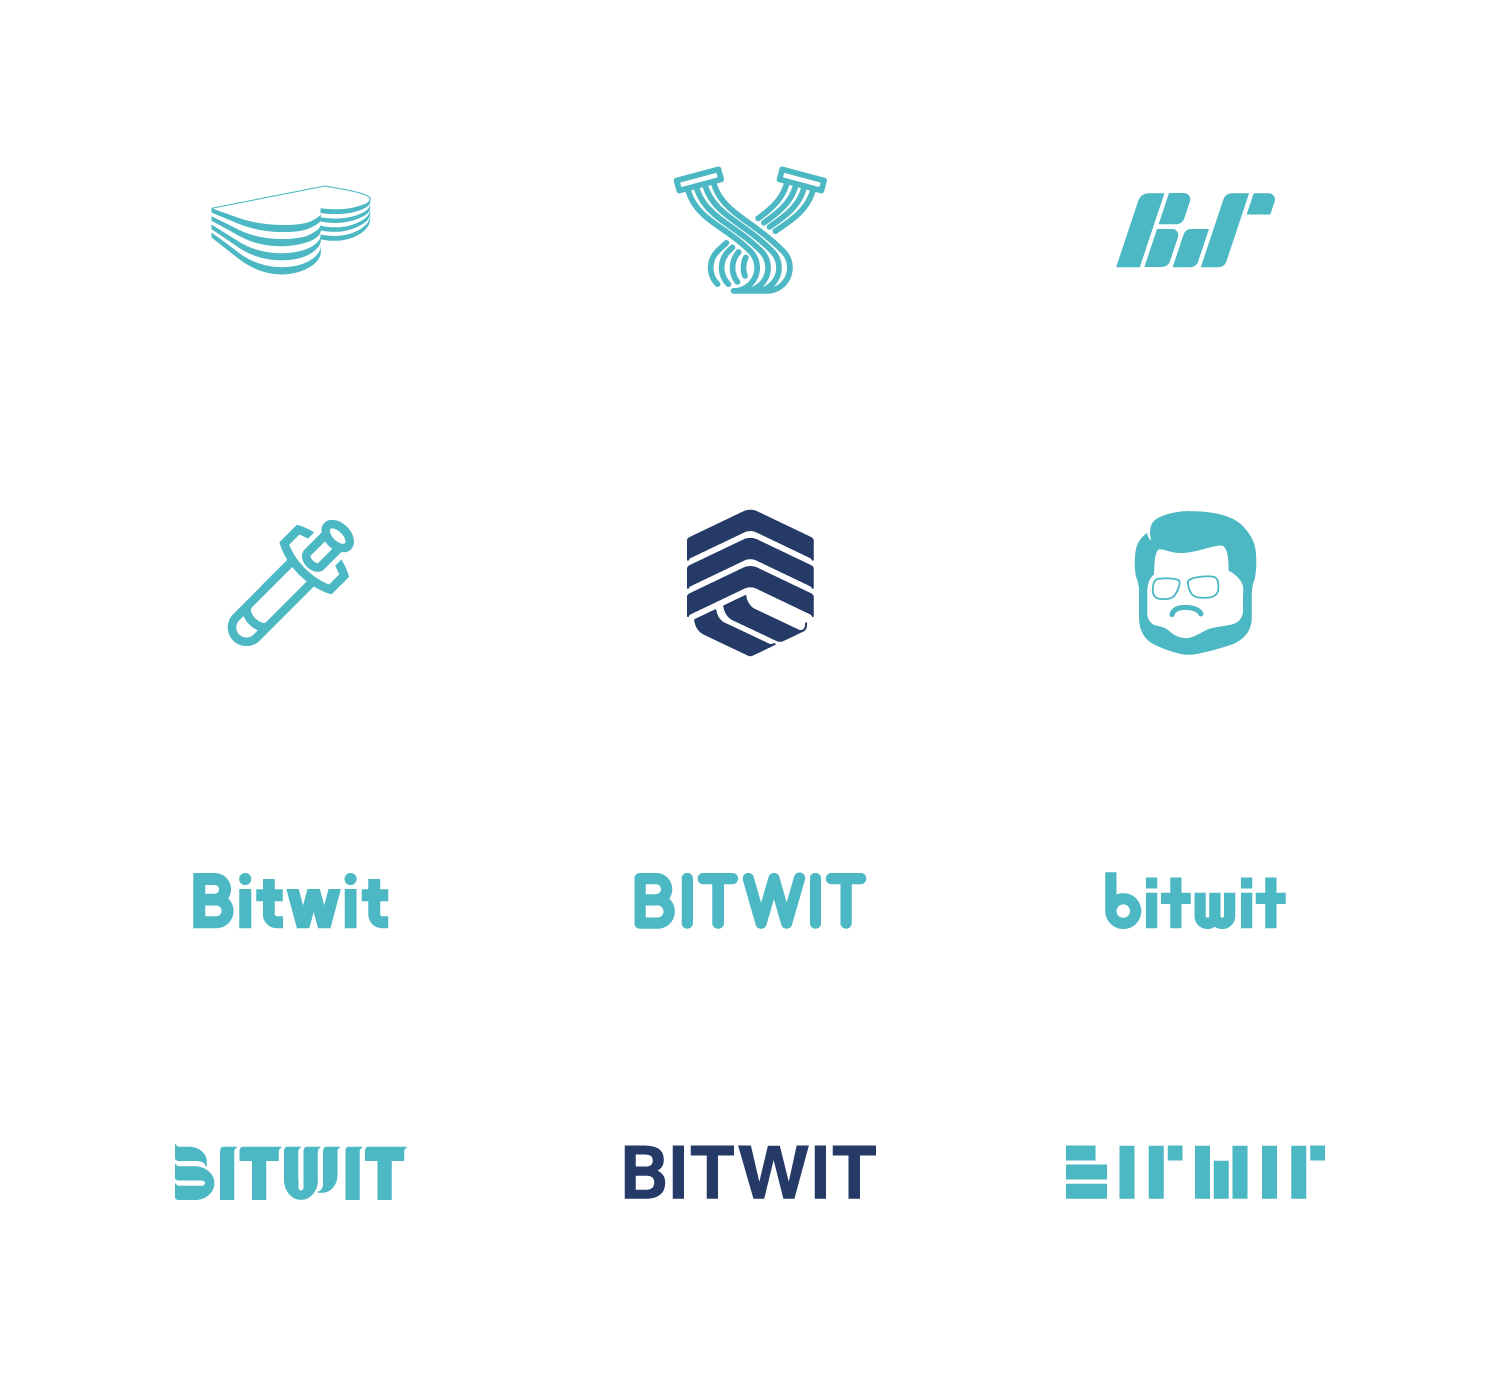 Various logos and logotypes designed for Bitwit.